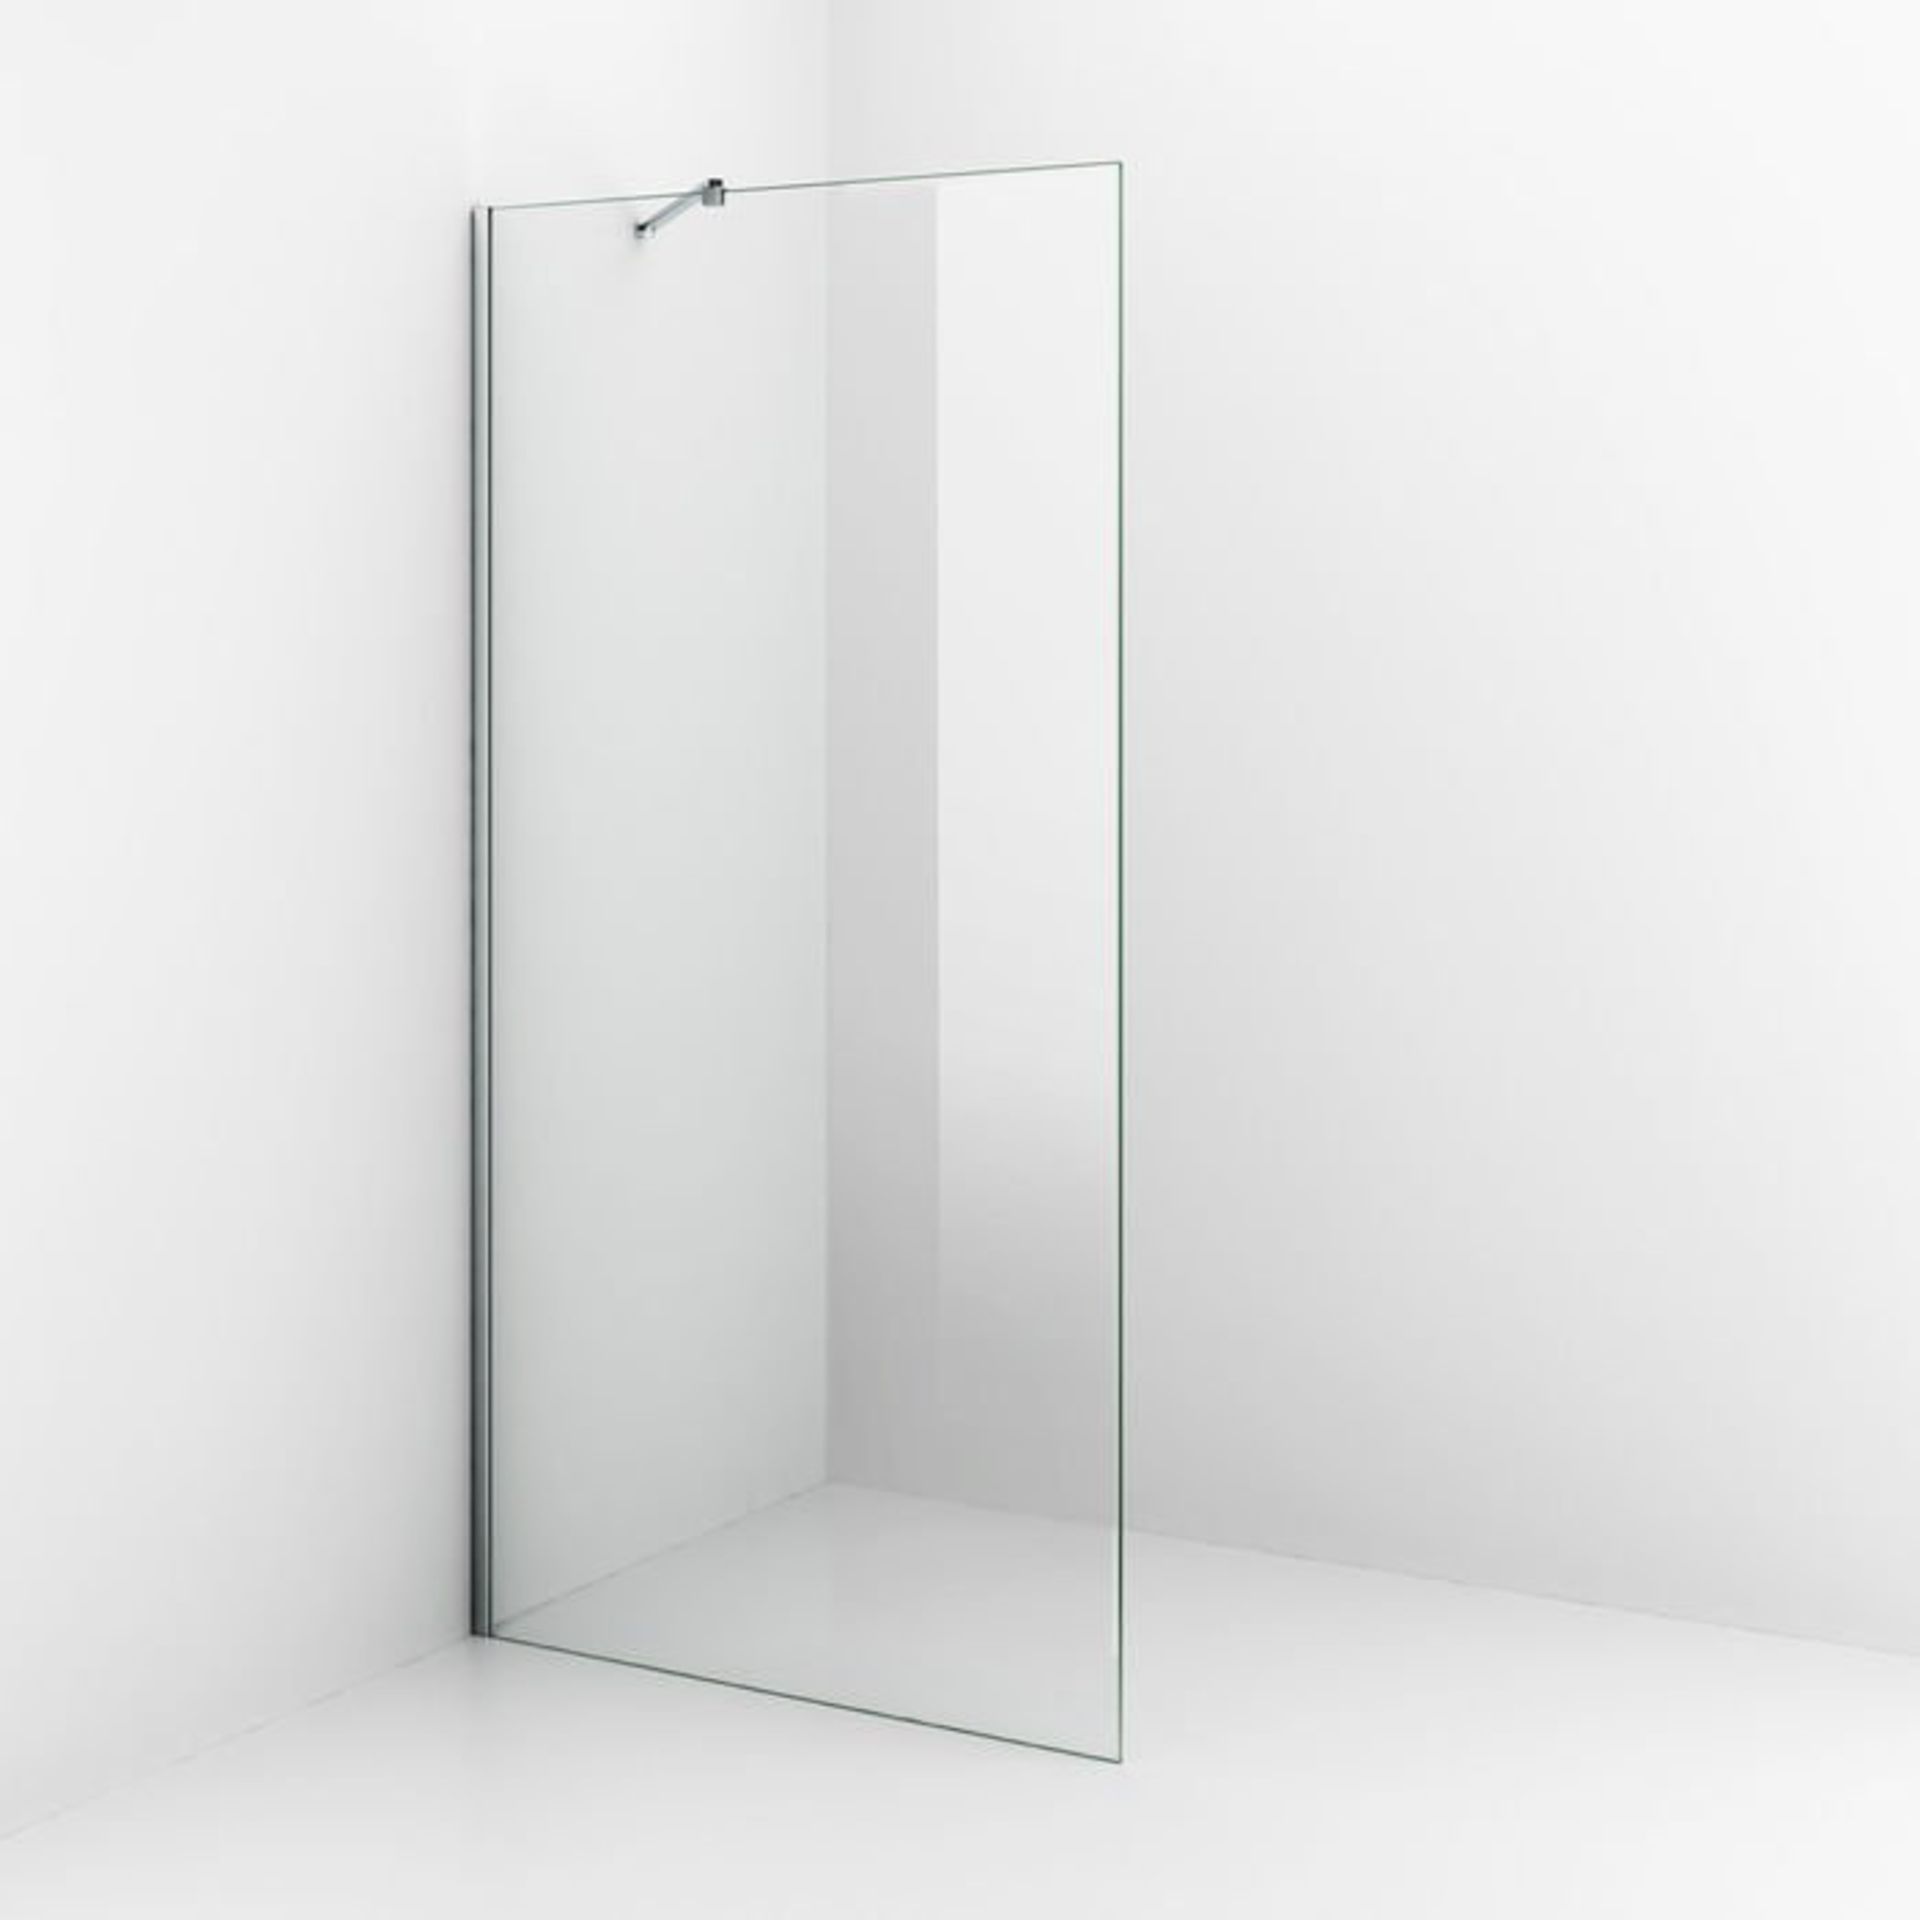 (G39) 900mm - 8mm - Premium EasyClean Wetroom Panel RRP £399.99 8mm EasyClean glass - Our glass - Image 3 of 7